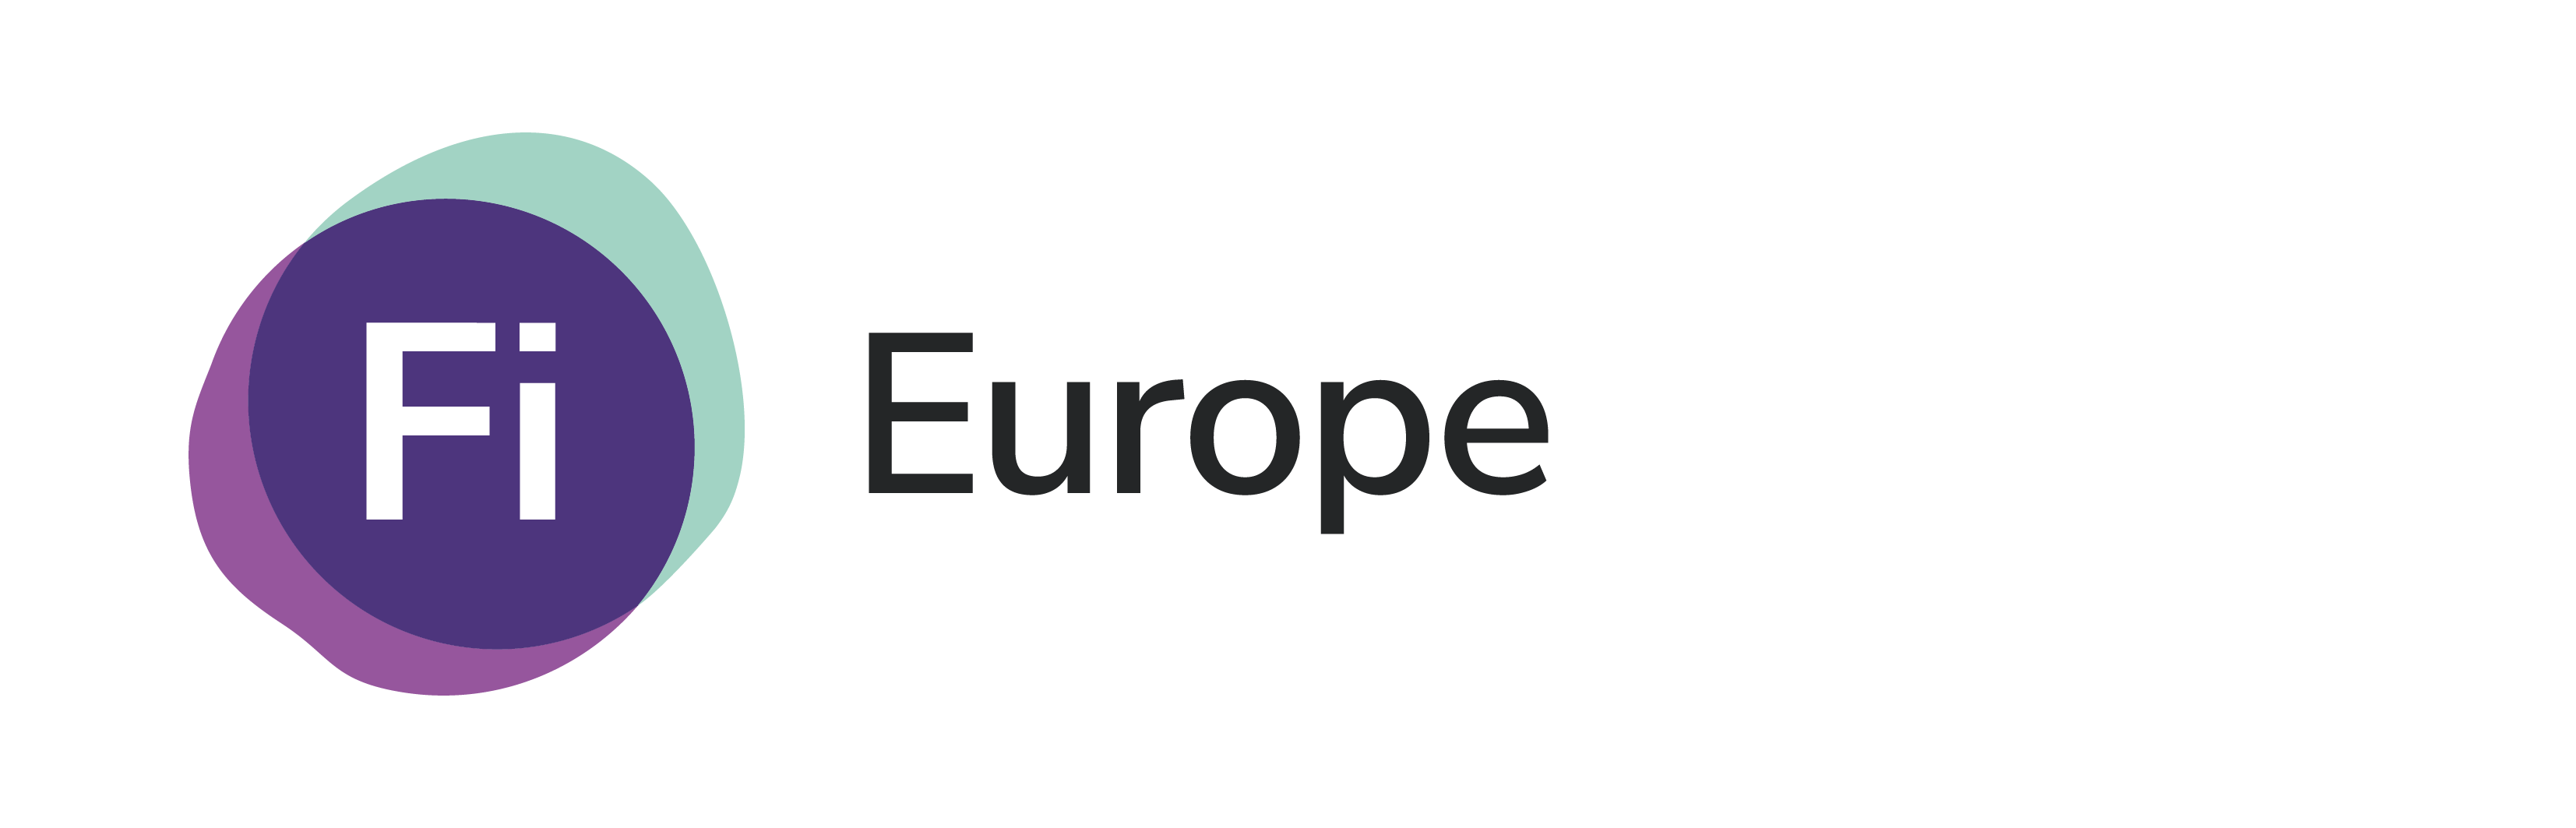 Fi Europe Online and In-Person